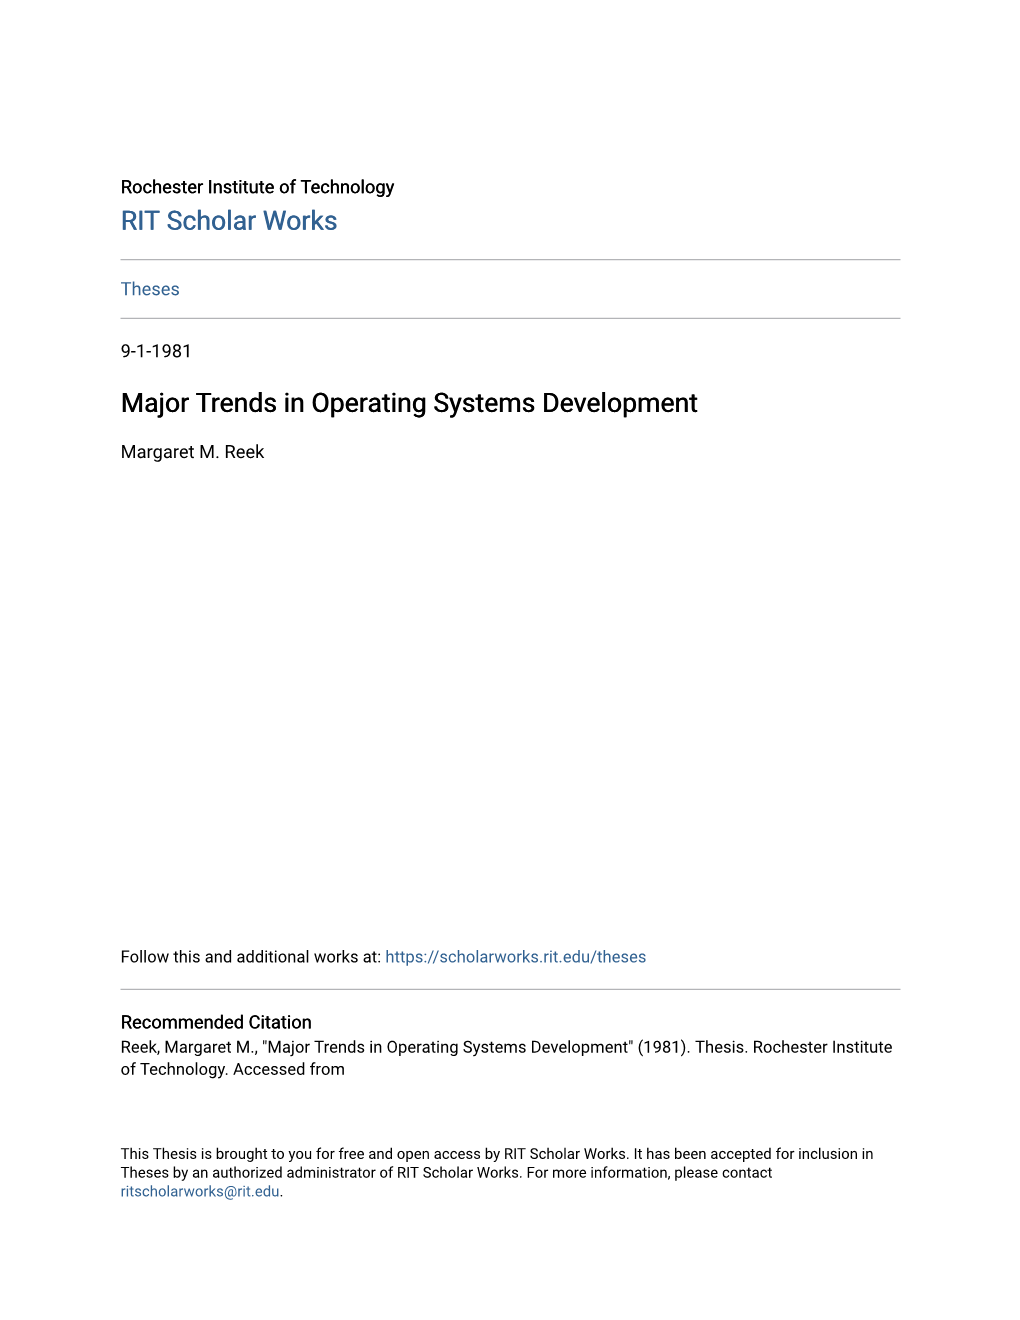 Major Trends in Operating Systems Development